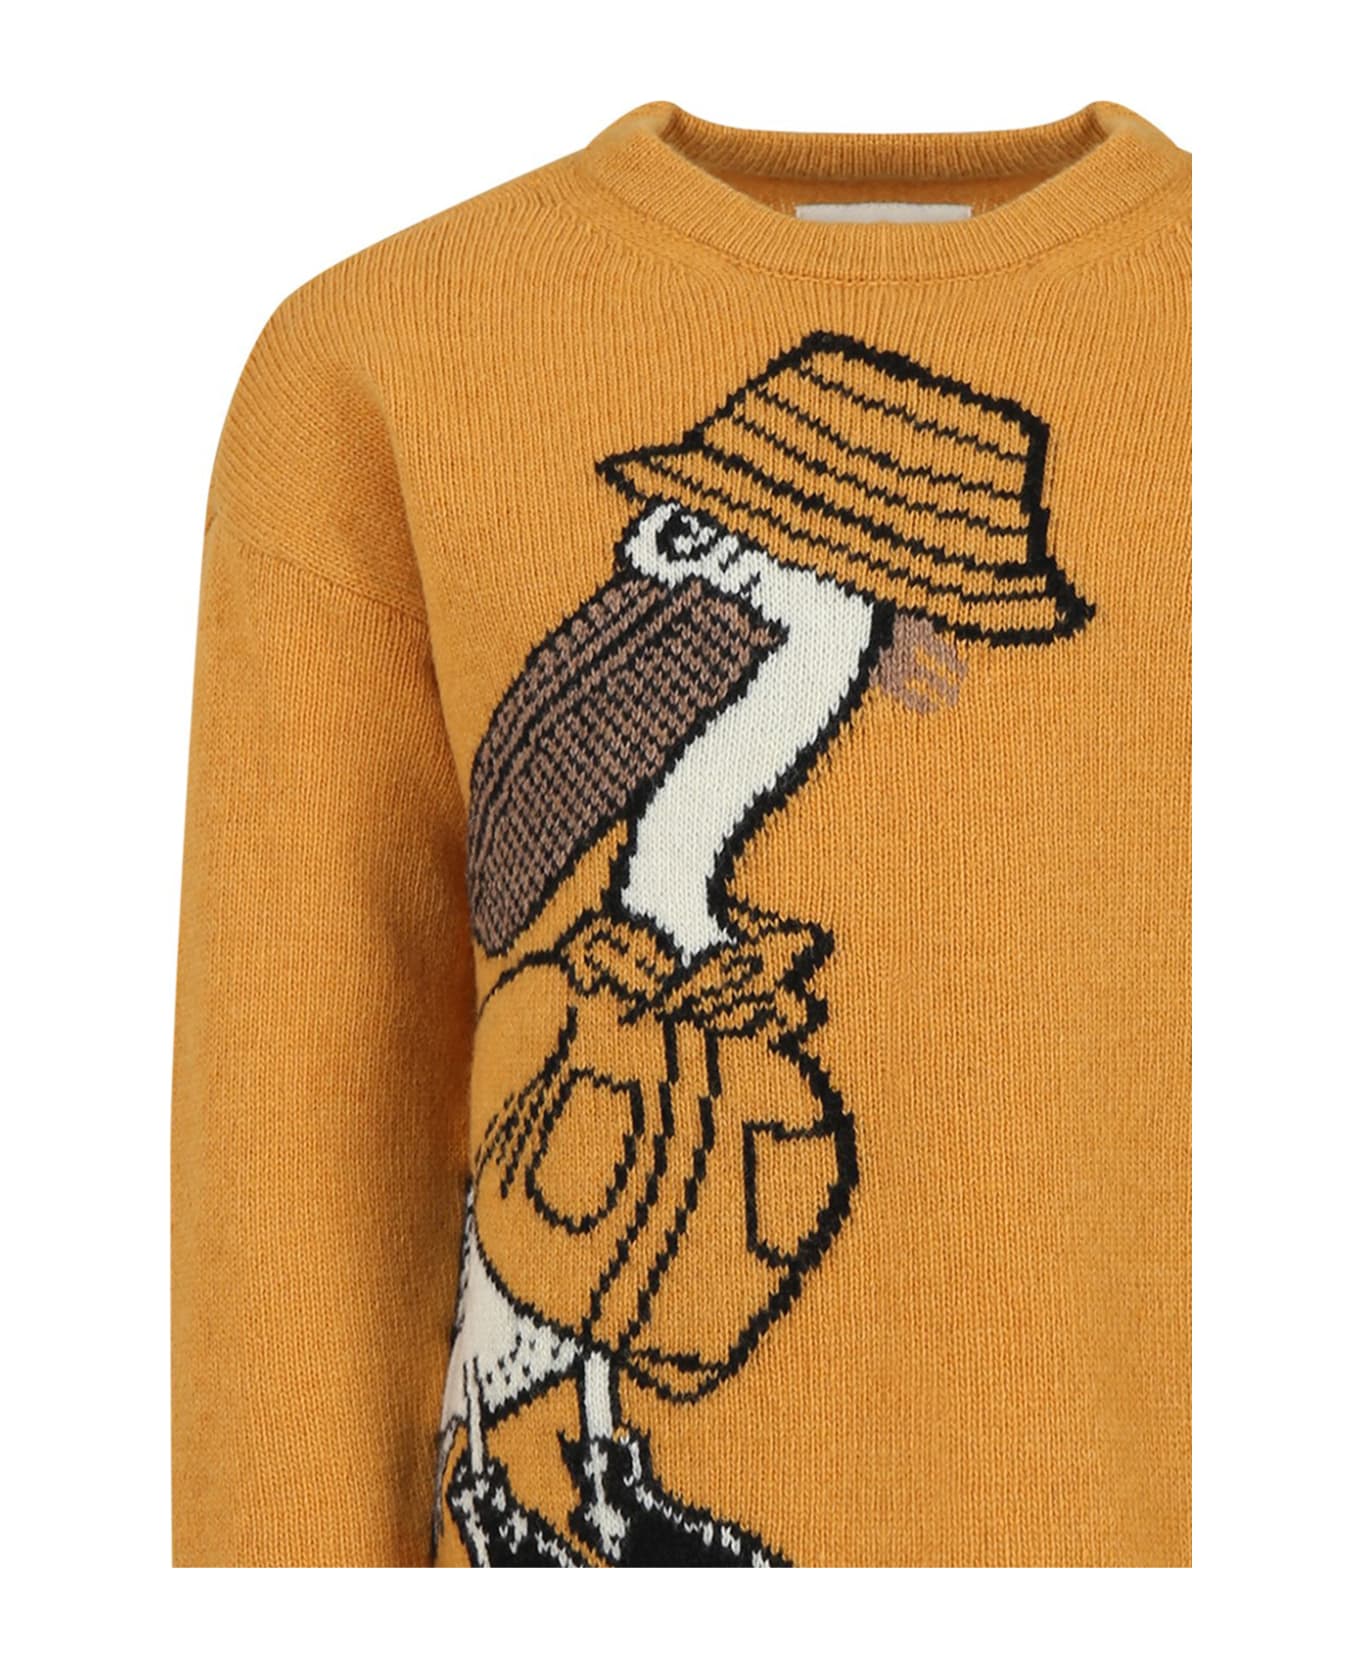 Armani Collezioni Yellow Sweater For Boy With Pelican - Yellow